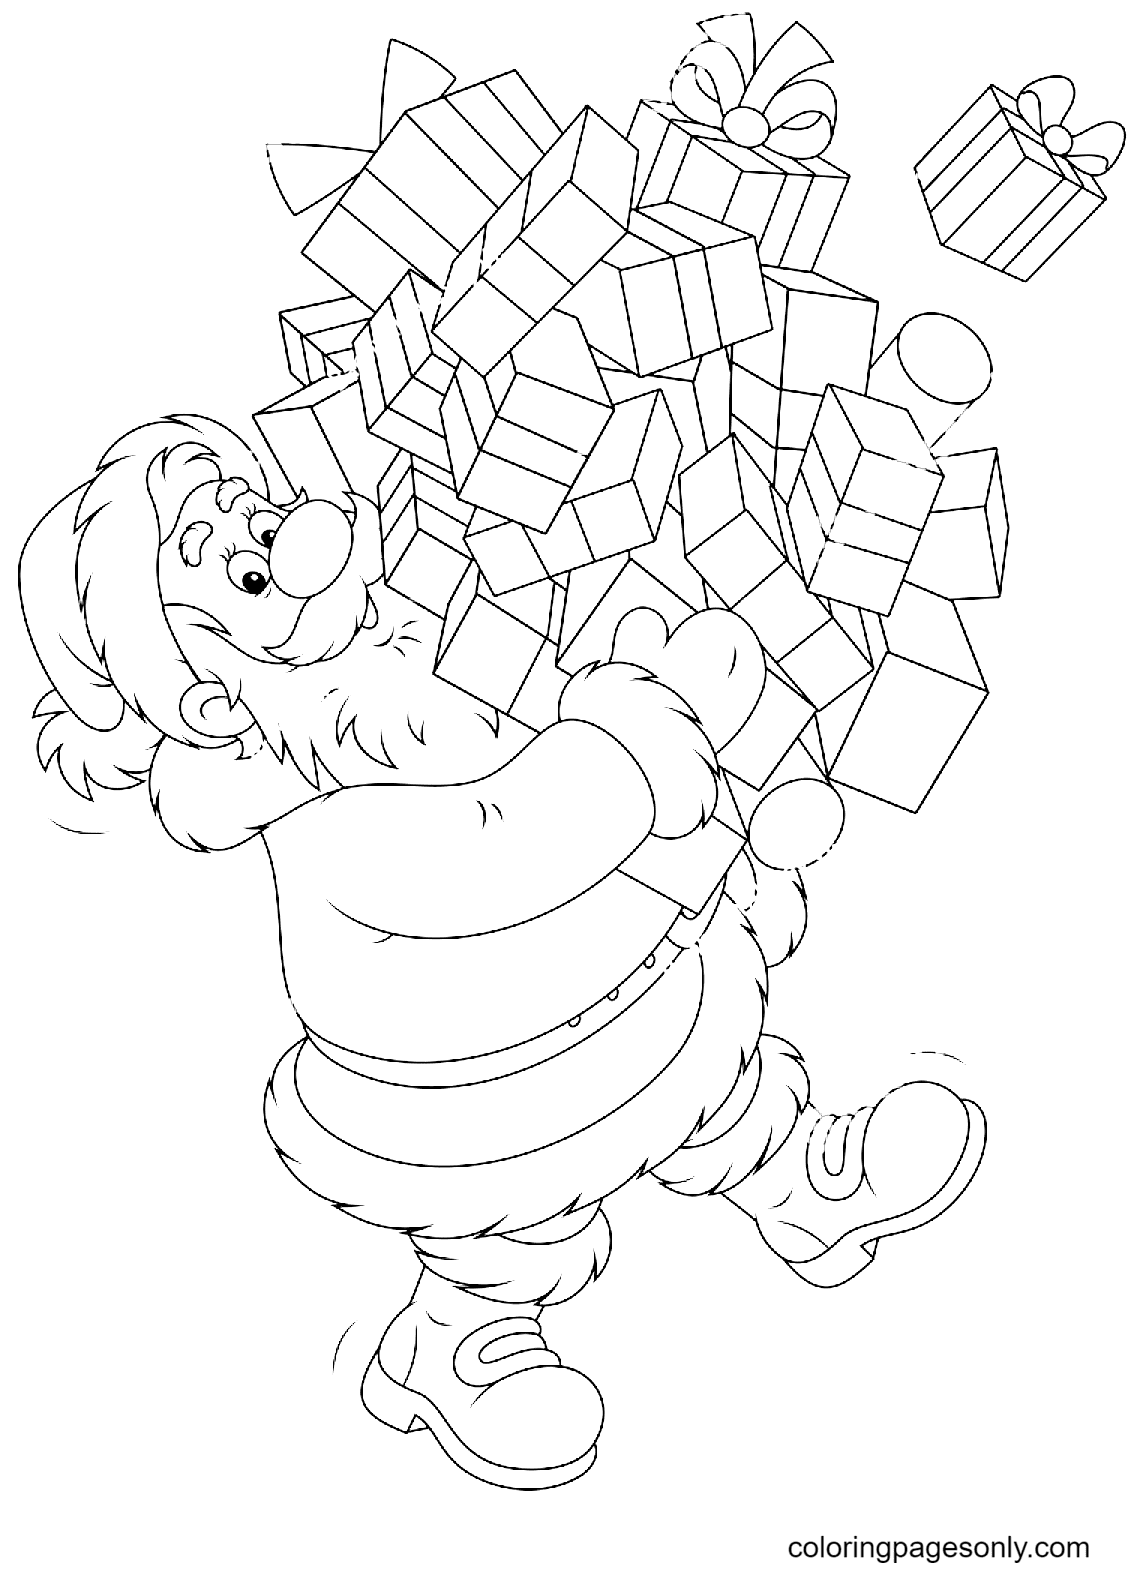 Santa with Christmas Gifts Coloring Page